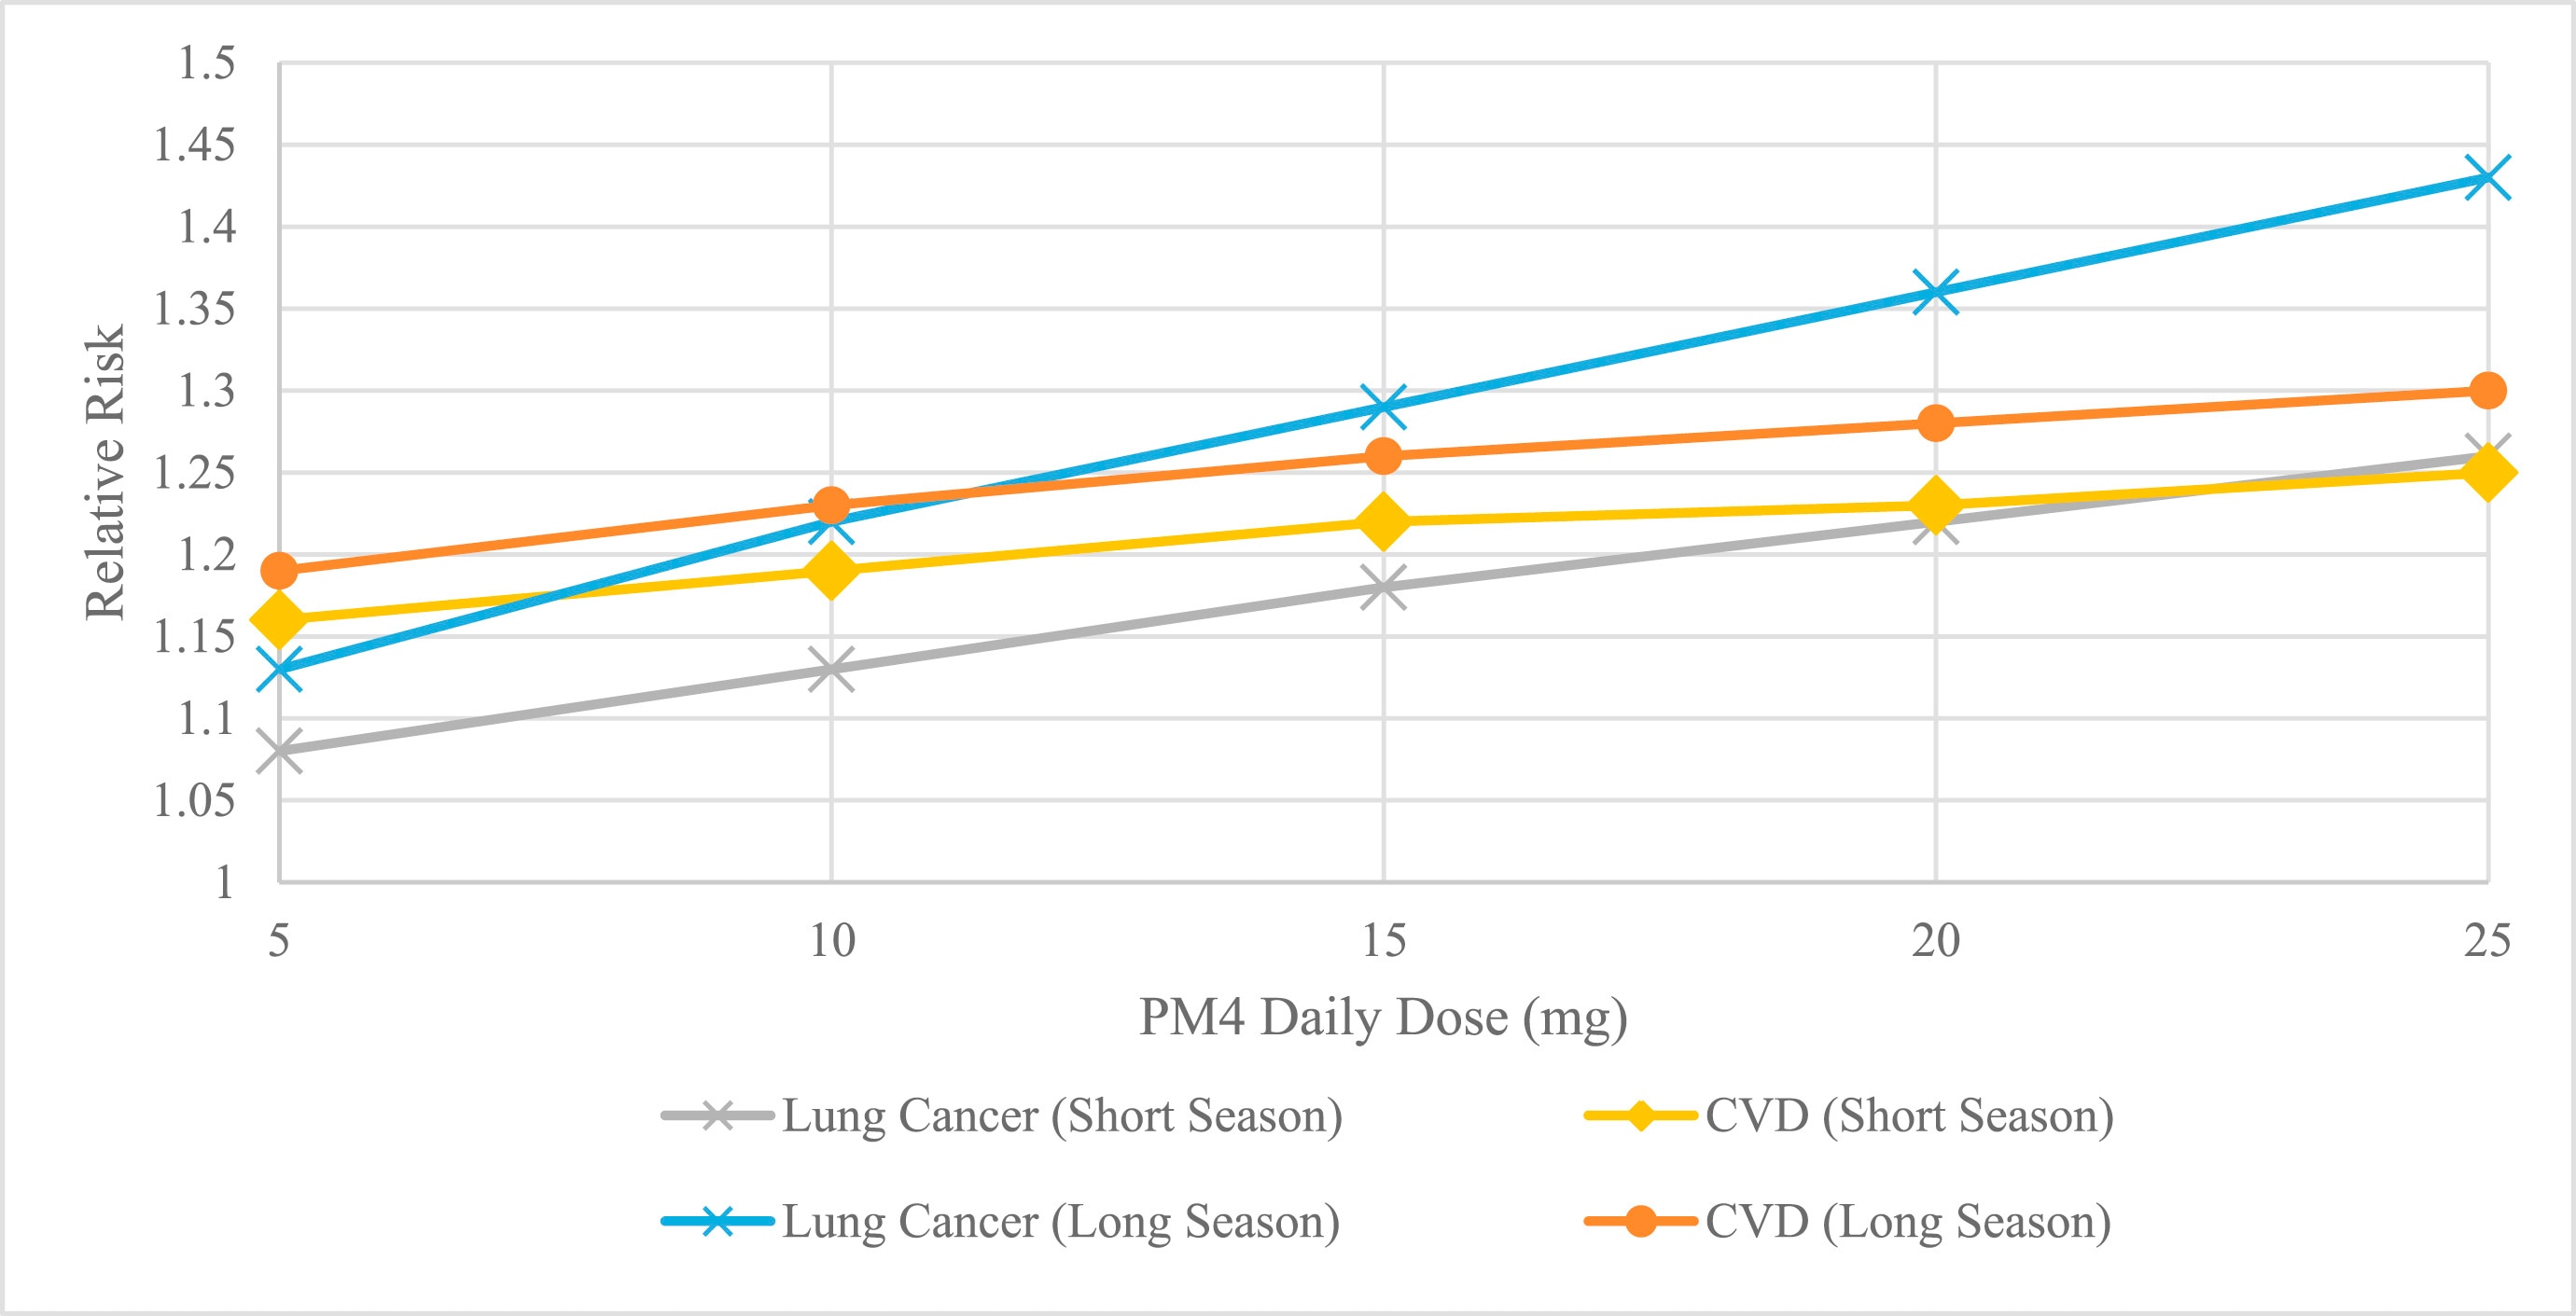 Graph of the relative risk of lung cancer and cardiovascular disease across firefighter career length